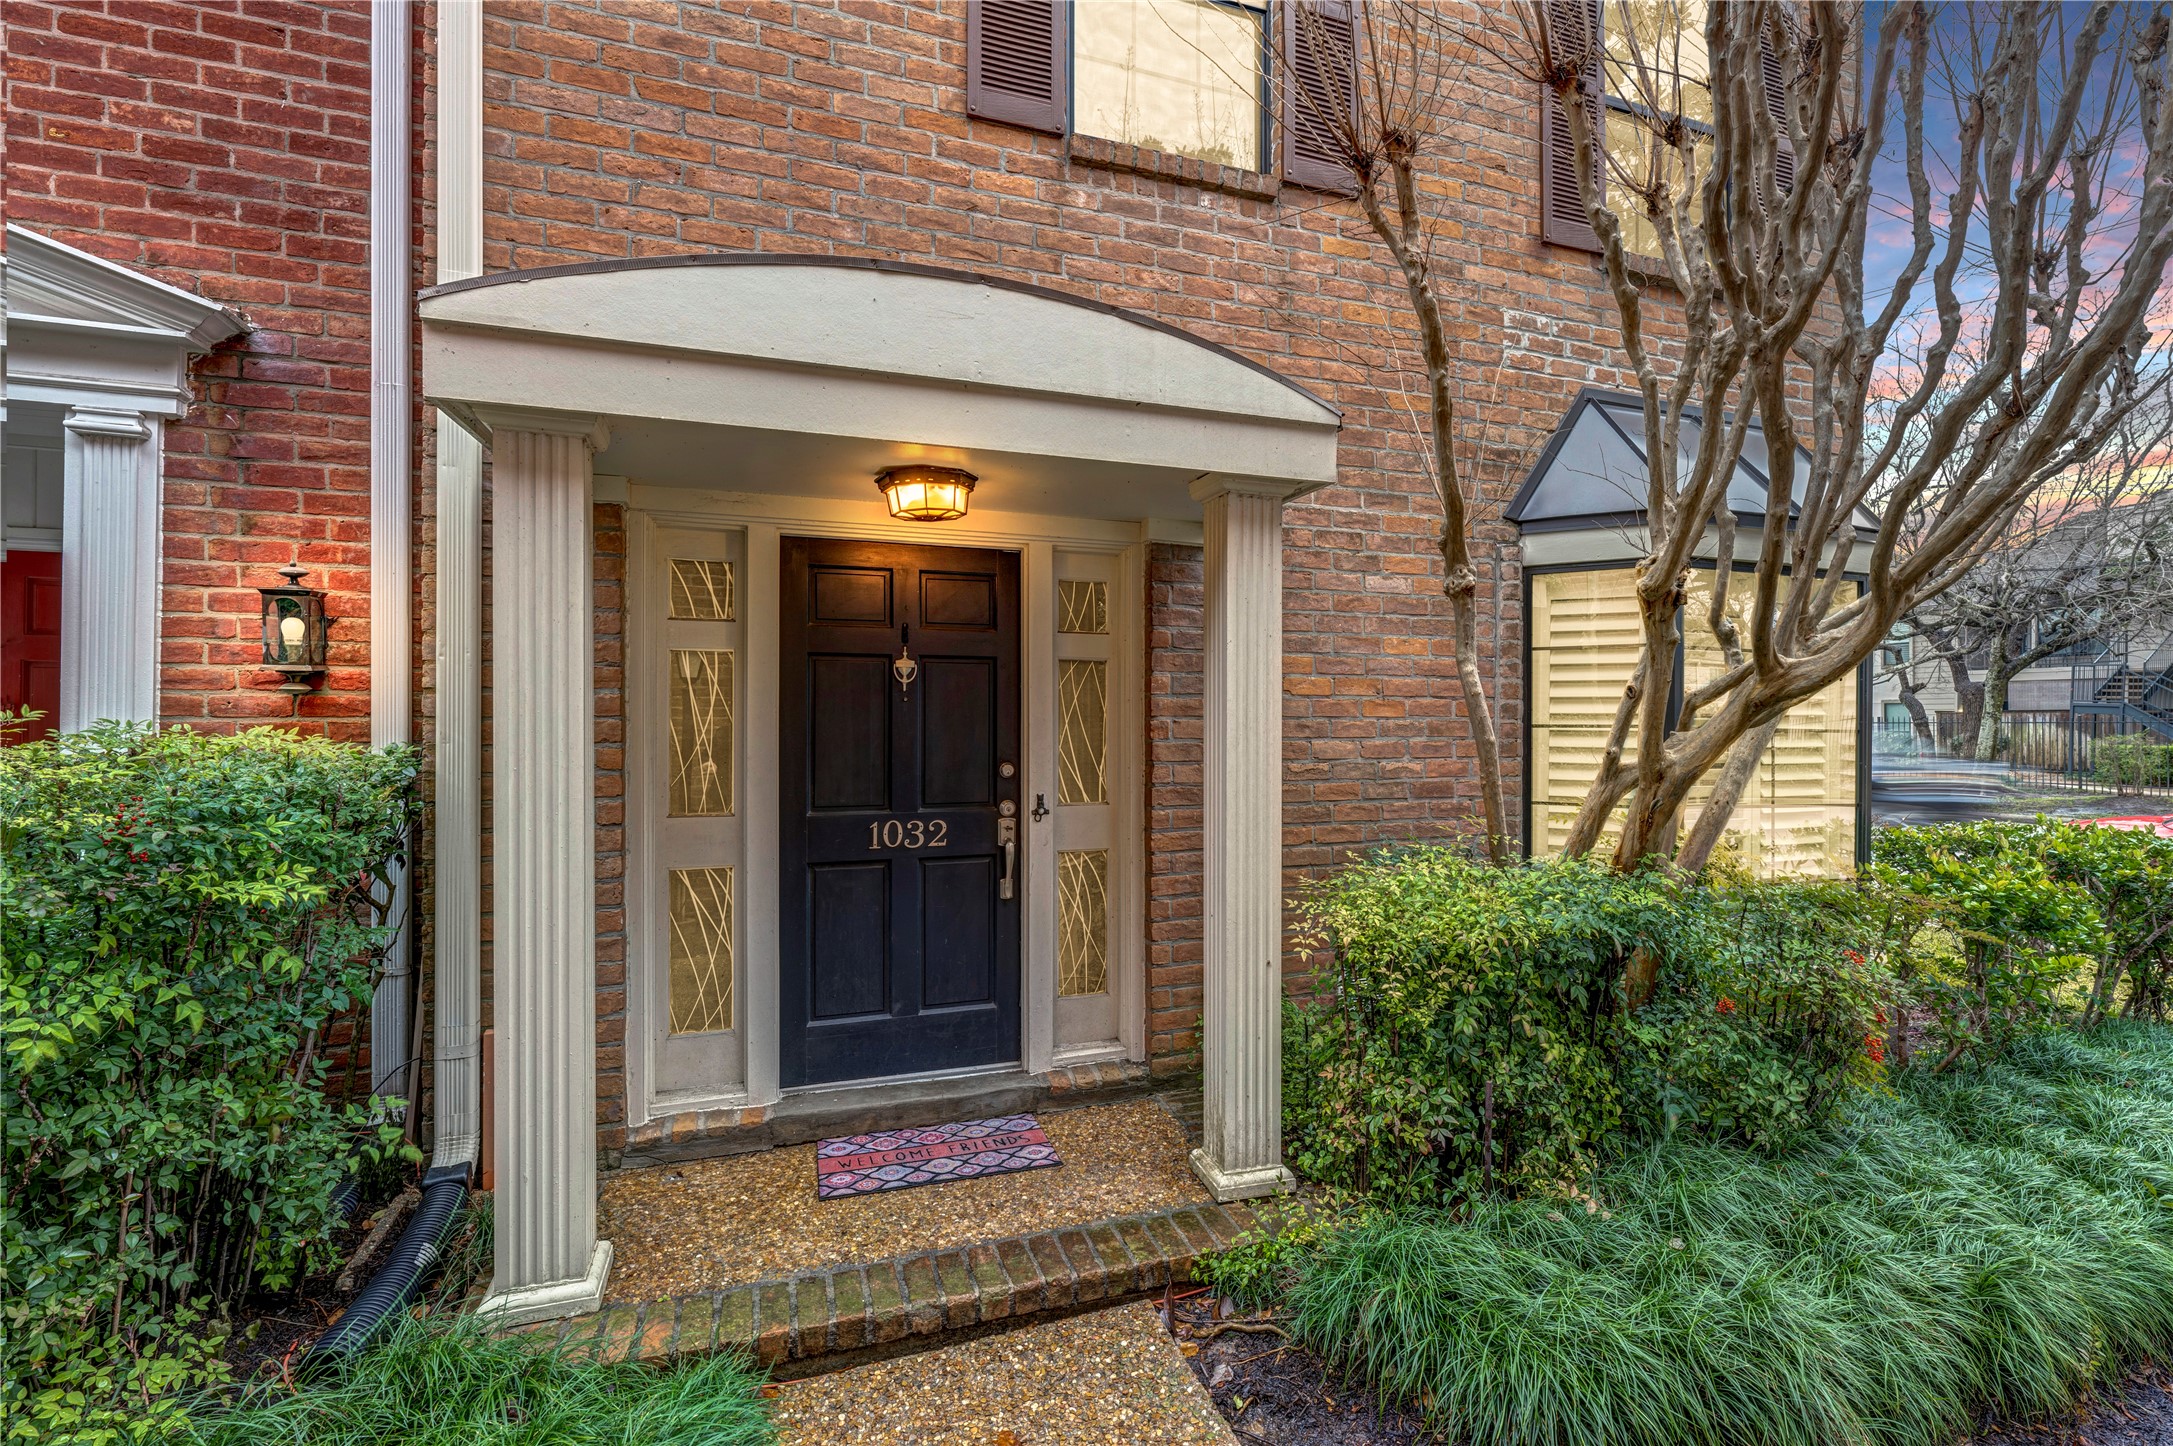 The front elevation of the building provides ample guest parking and is strategically positioned within the complex. A charming covered porch and meticulously crafted professional landscaping make for an inviting and hospitable entryway.